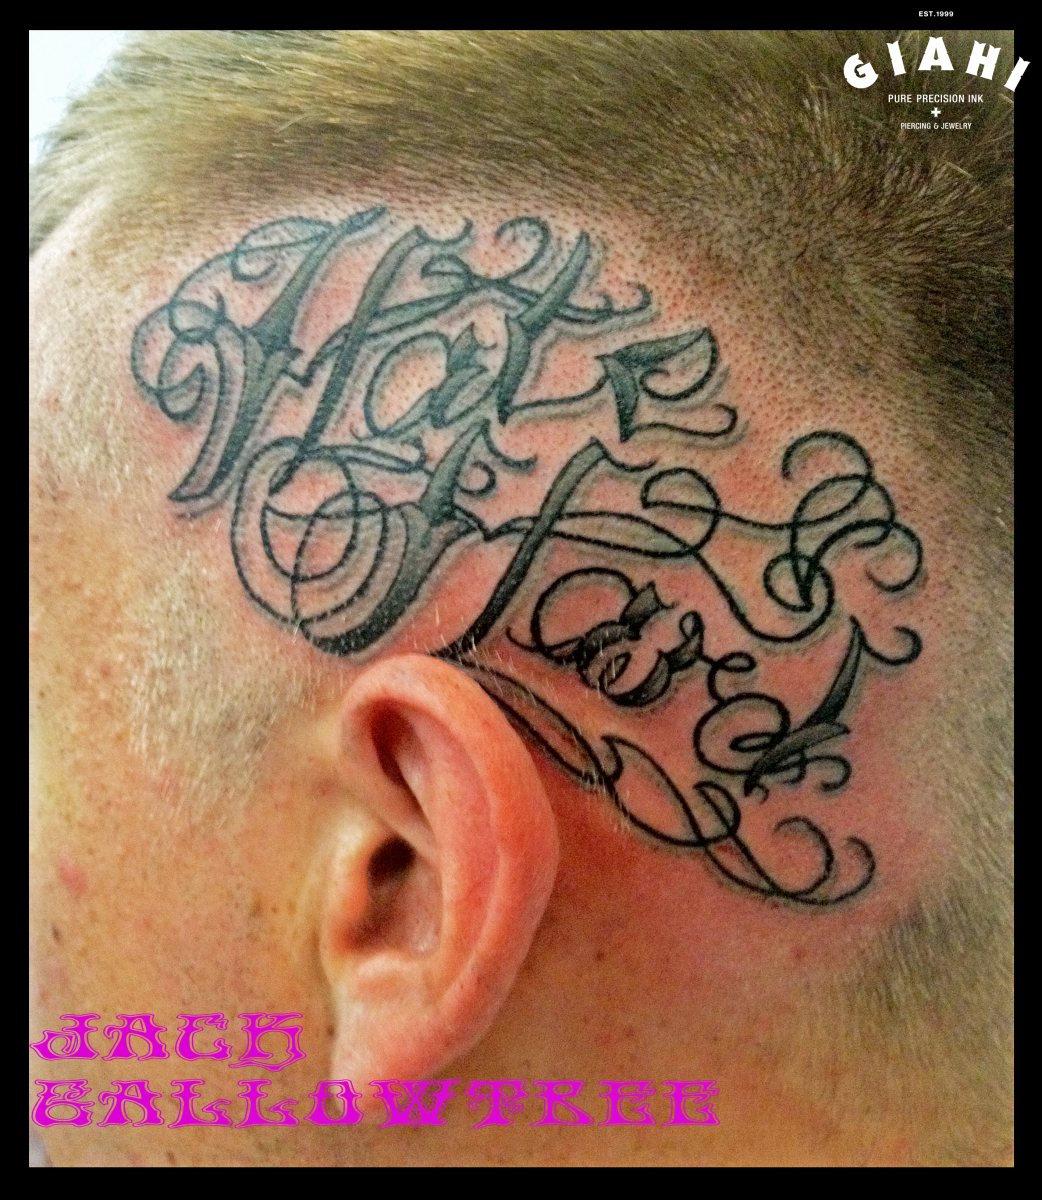 Ear Font Lettering tattoo by Jack Gallowtree